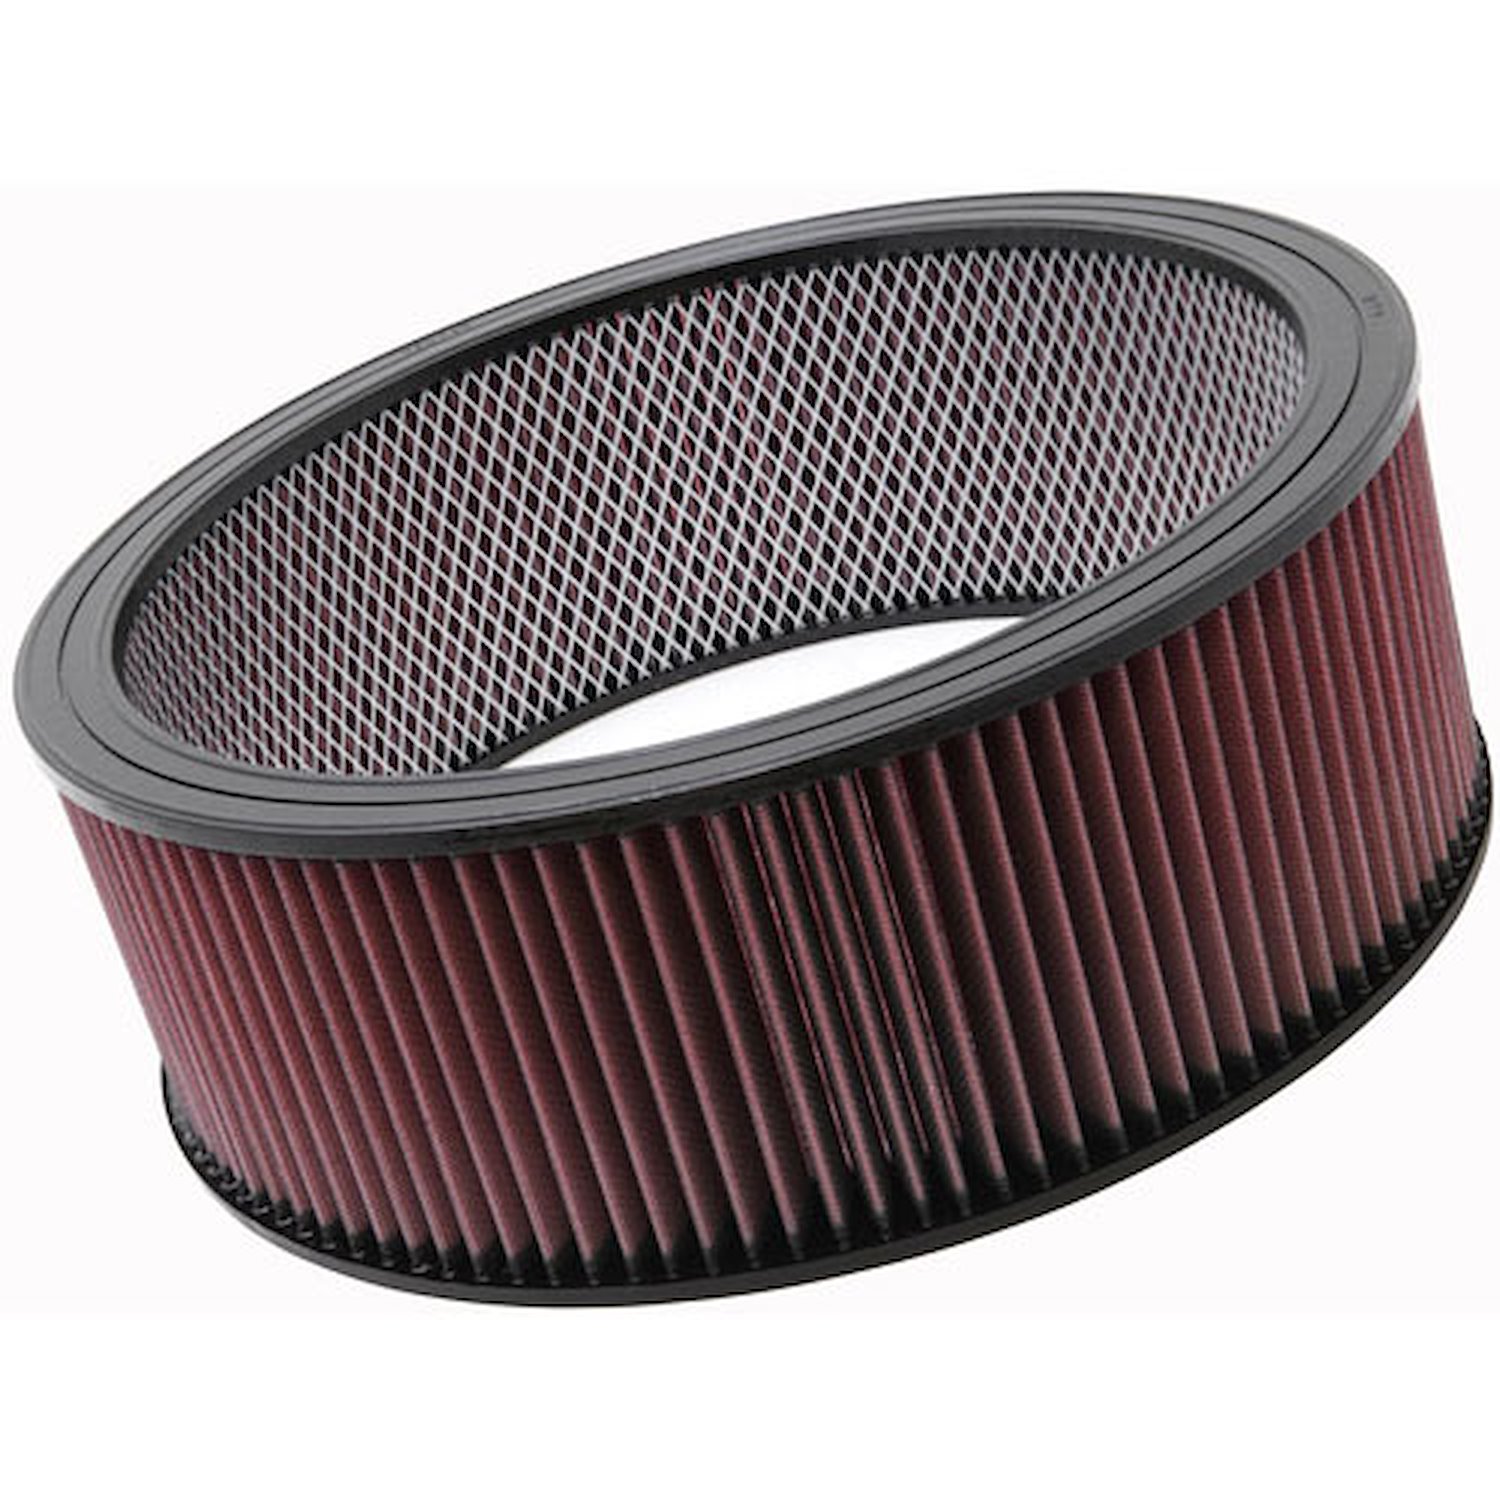 Air filter and Breather Kit 14" x 5" X-Stream Air Filter Element